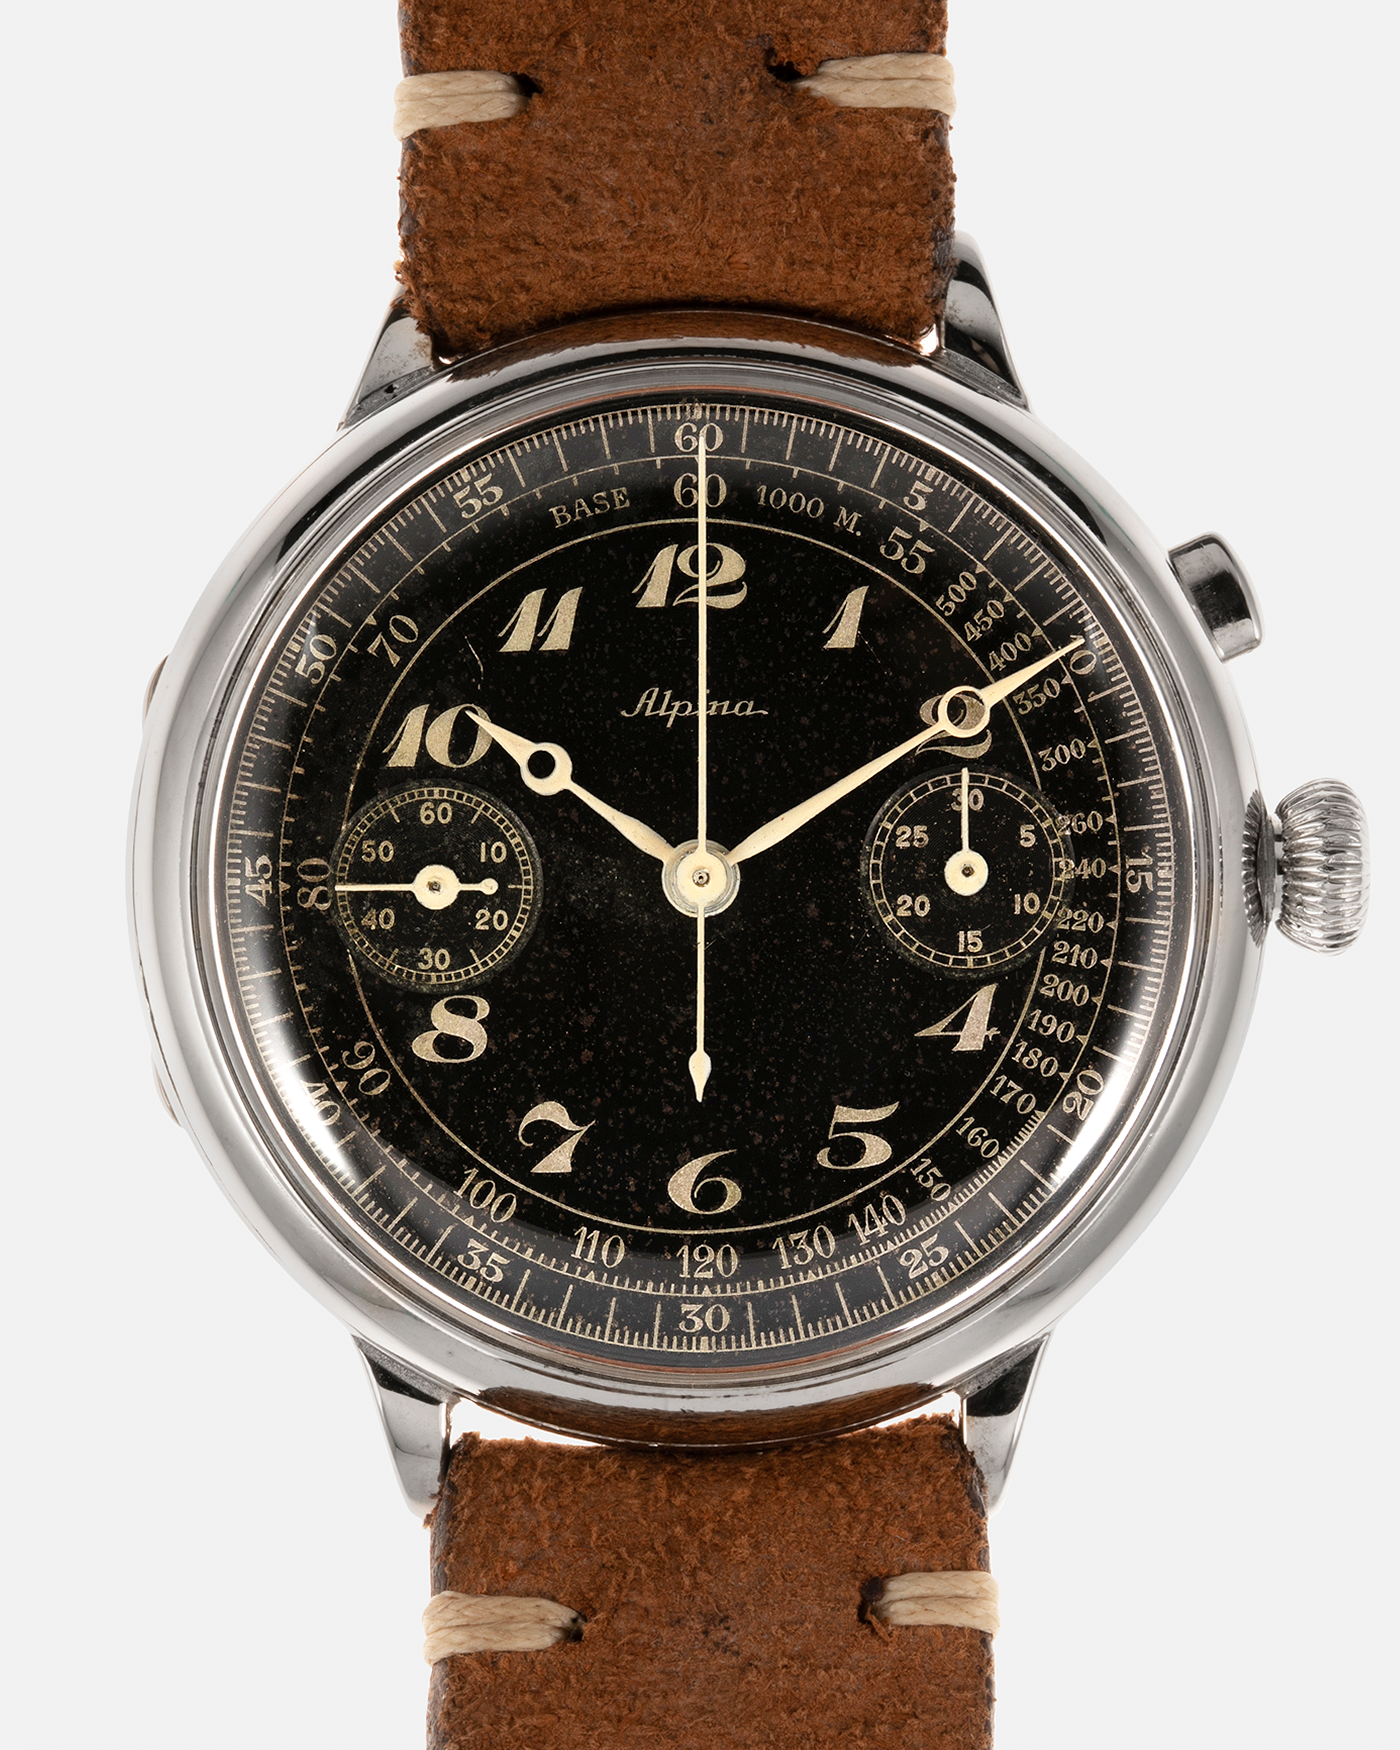 Brand: Alpina Model: Monopusher Chronograph Serial Number: 392919 Year: 1930’s Material: Nickel Chrome Movement: Modified Landeron-Hahn Caliber, Manual-Winding Case Diameter: 41mm Lug Width: 18mm Strap: Unnamed Open End Distressed Brown Leather Strap